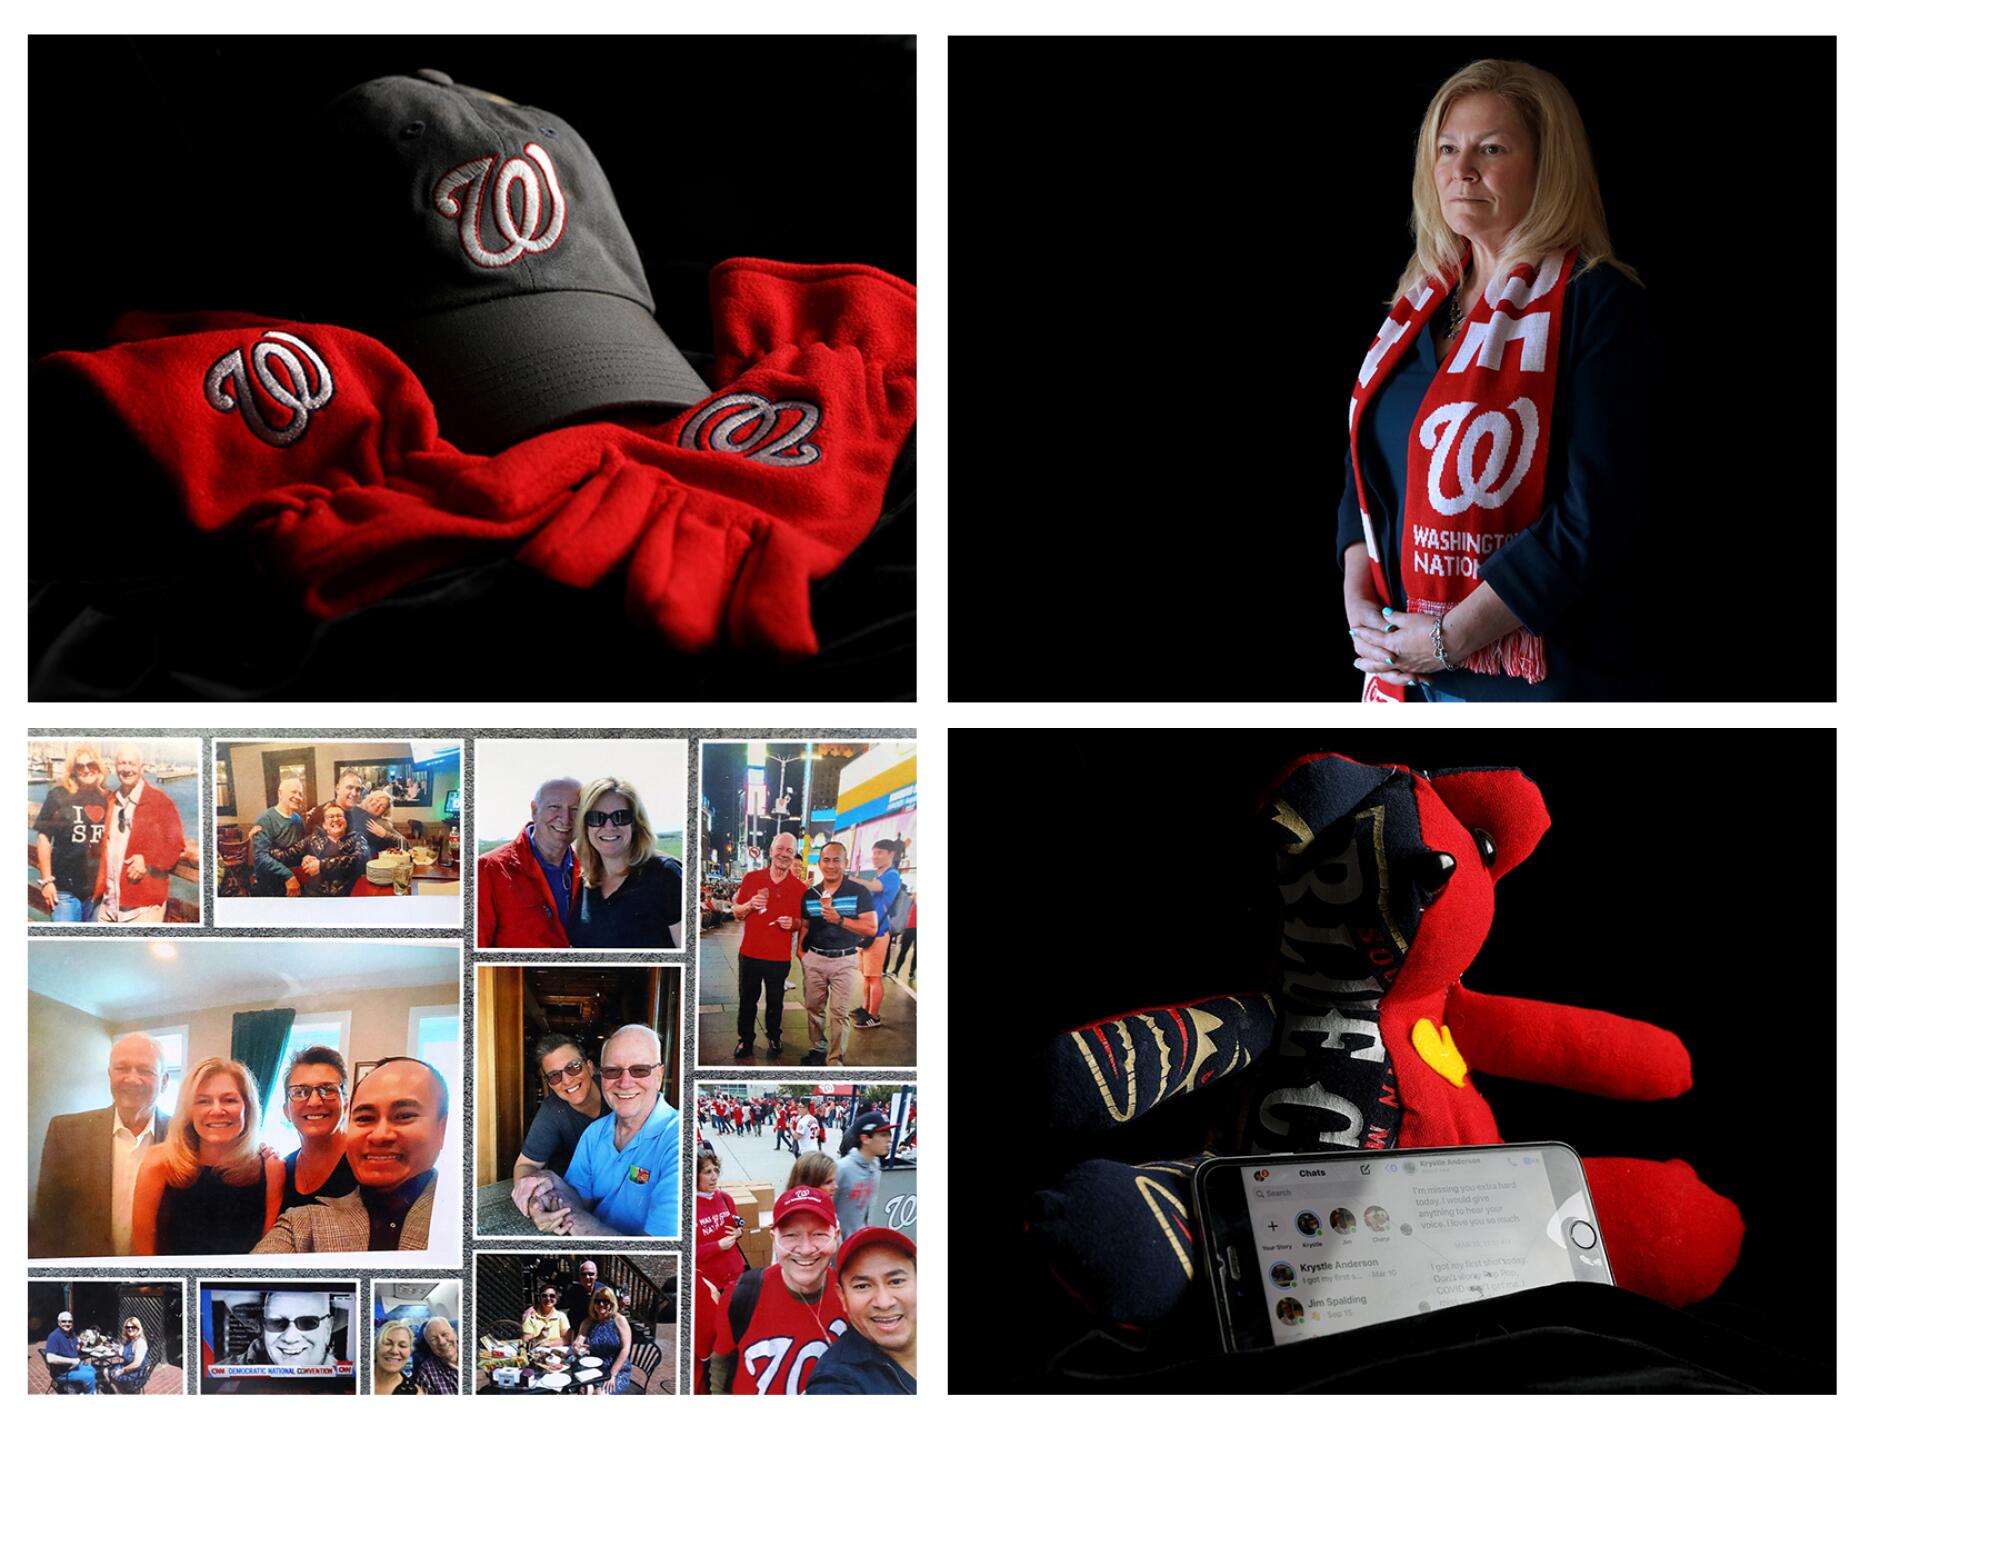 Four photos: a Washington Nationals cap and gloves, a woman in a Natioals scarf, a family photo collage, and a teddy bear